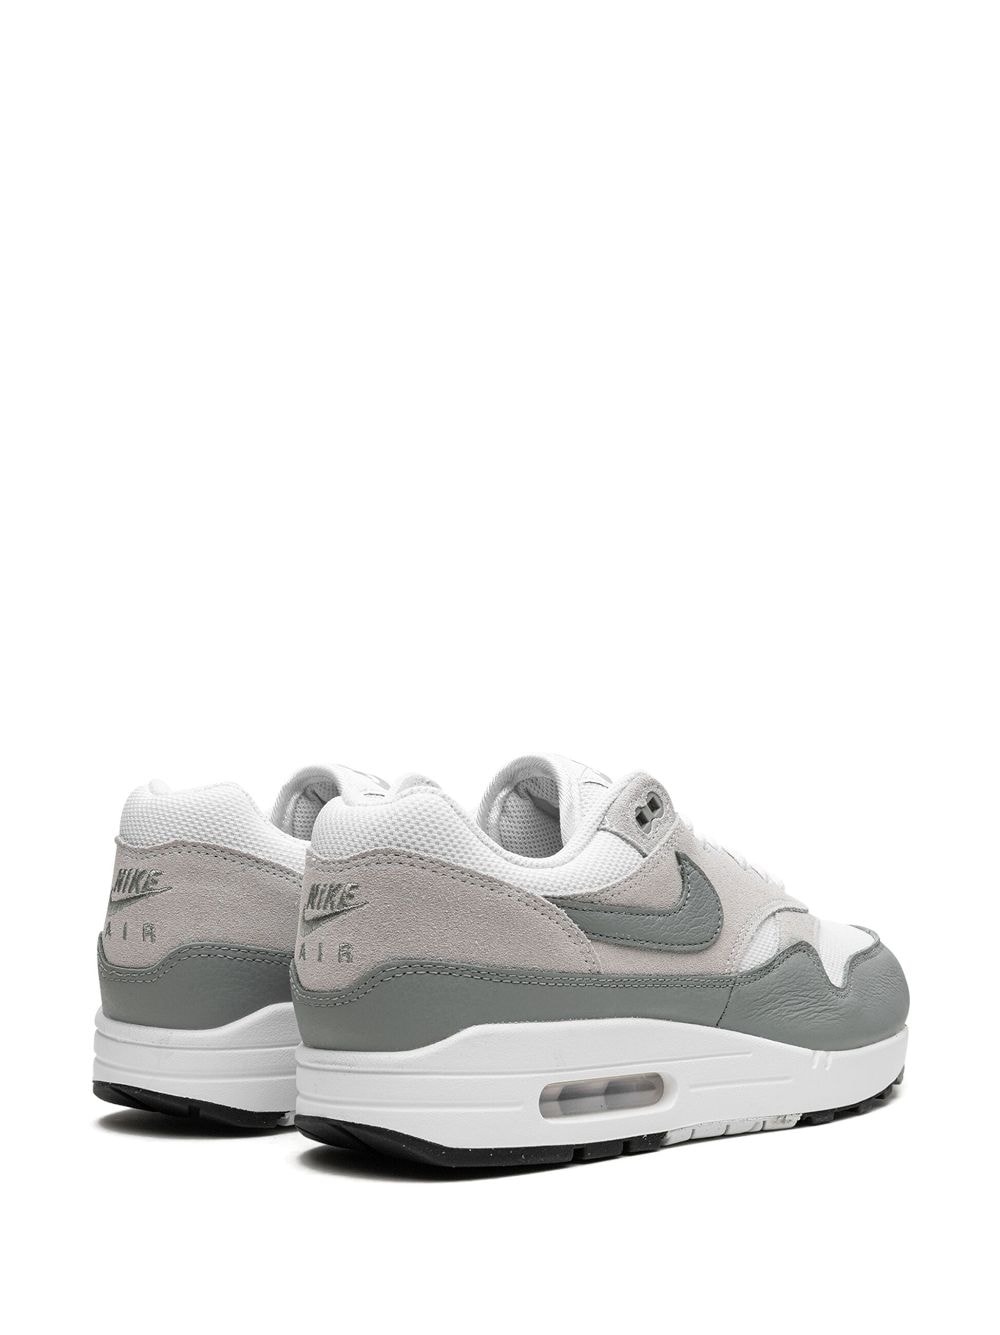 Air Max 1 "White/Mica Green" sneakers - 3